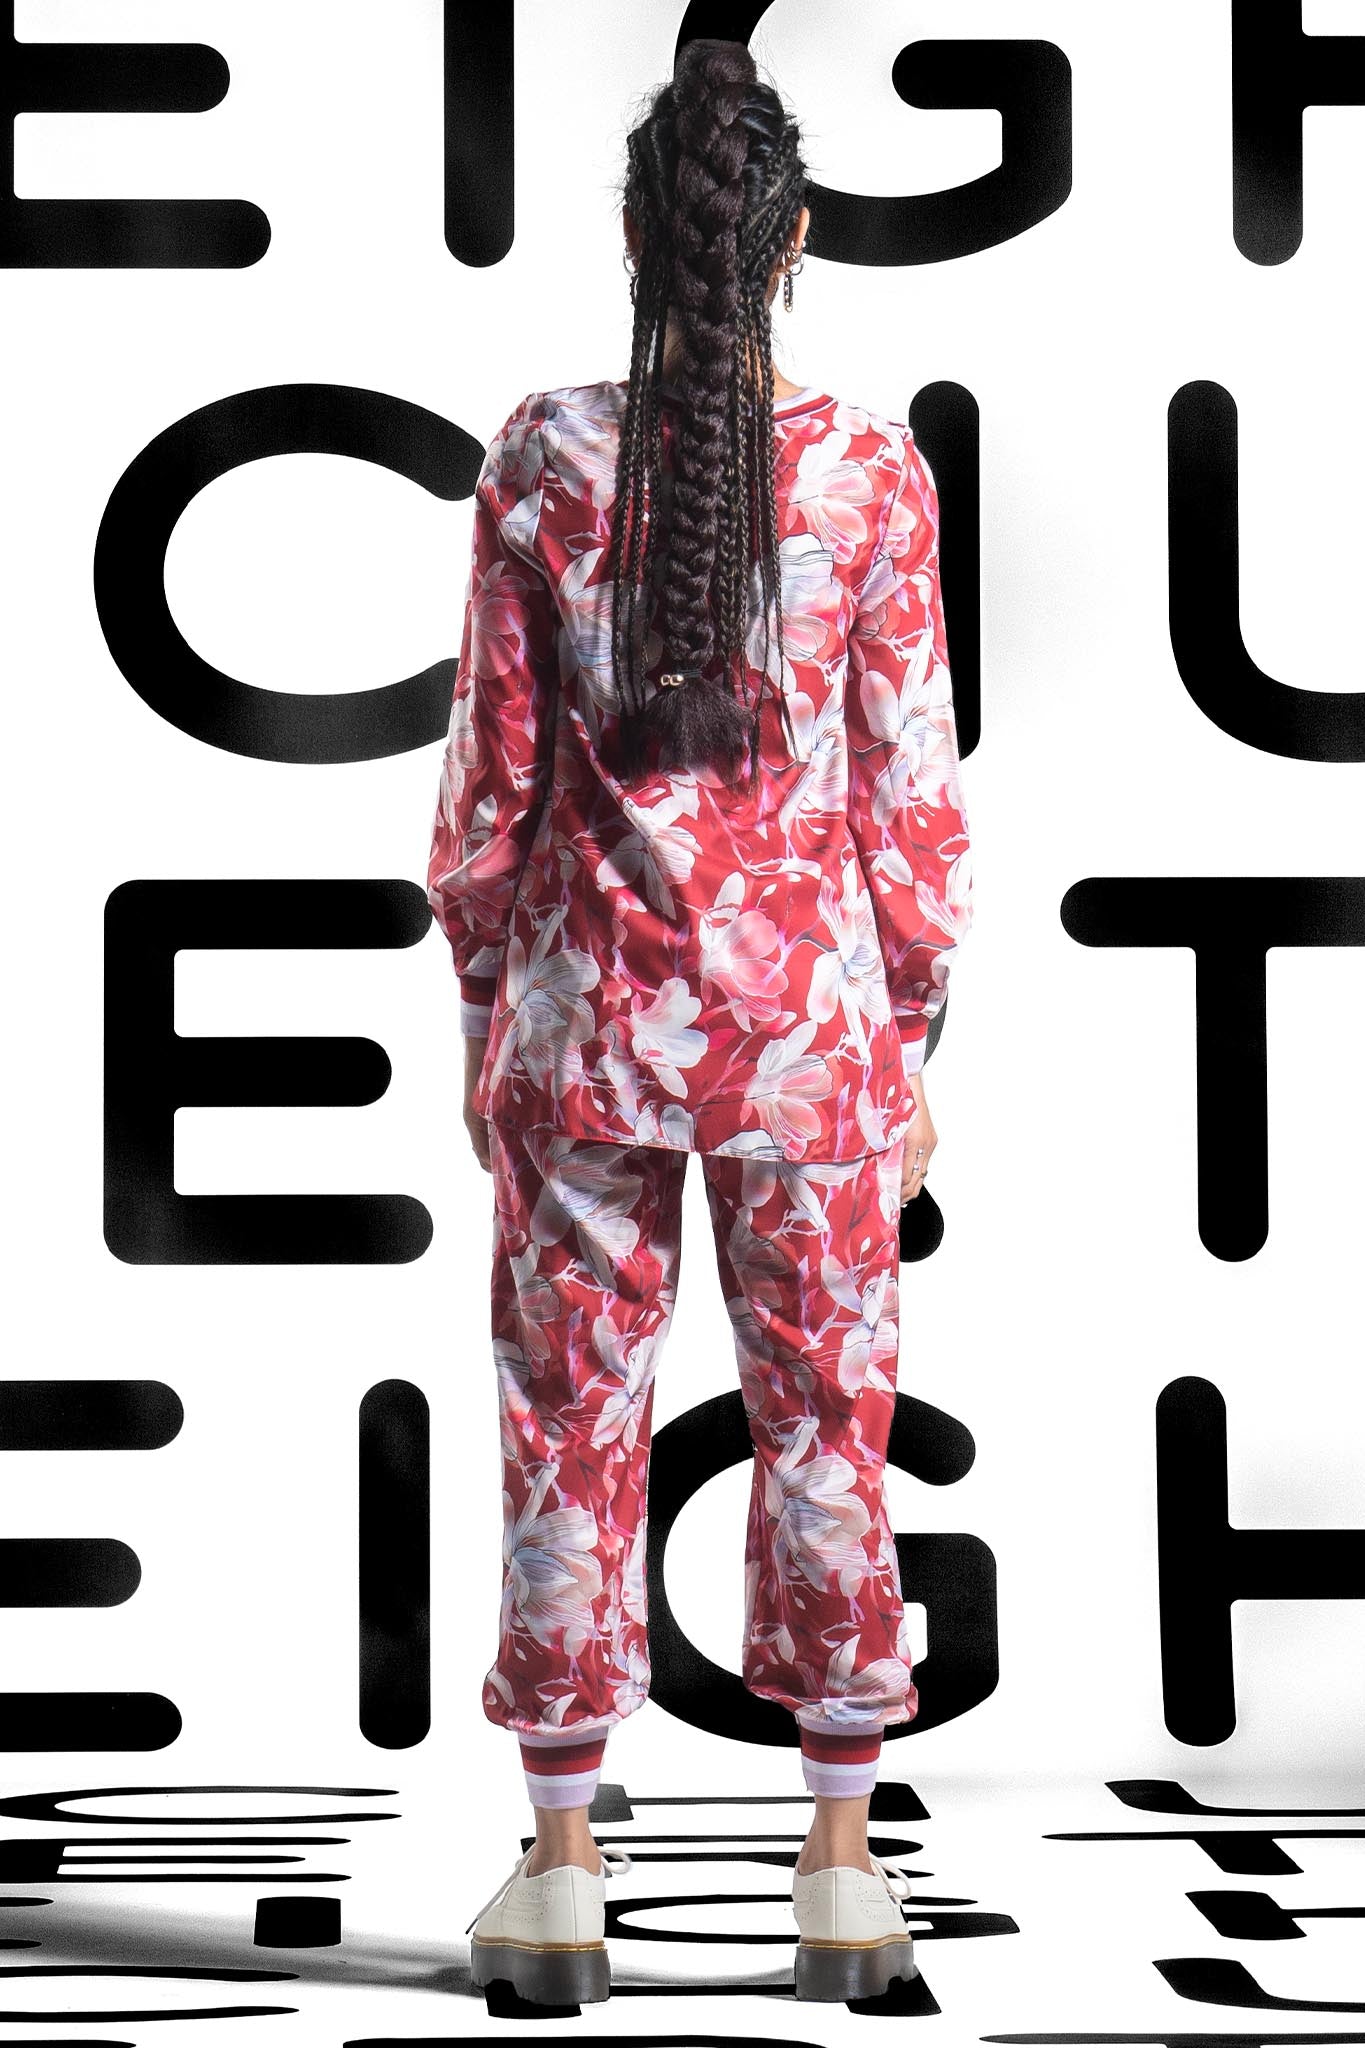 Leigh Schubert Outfit Sets KANYE Red Peony